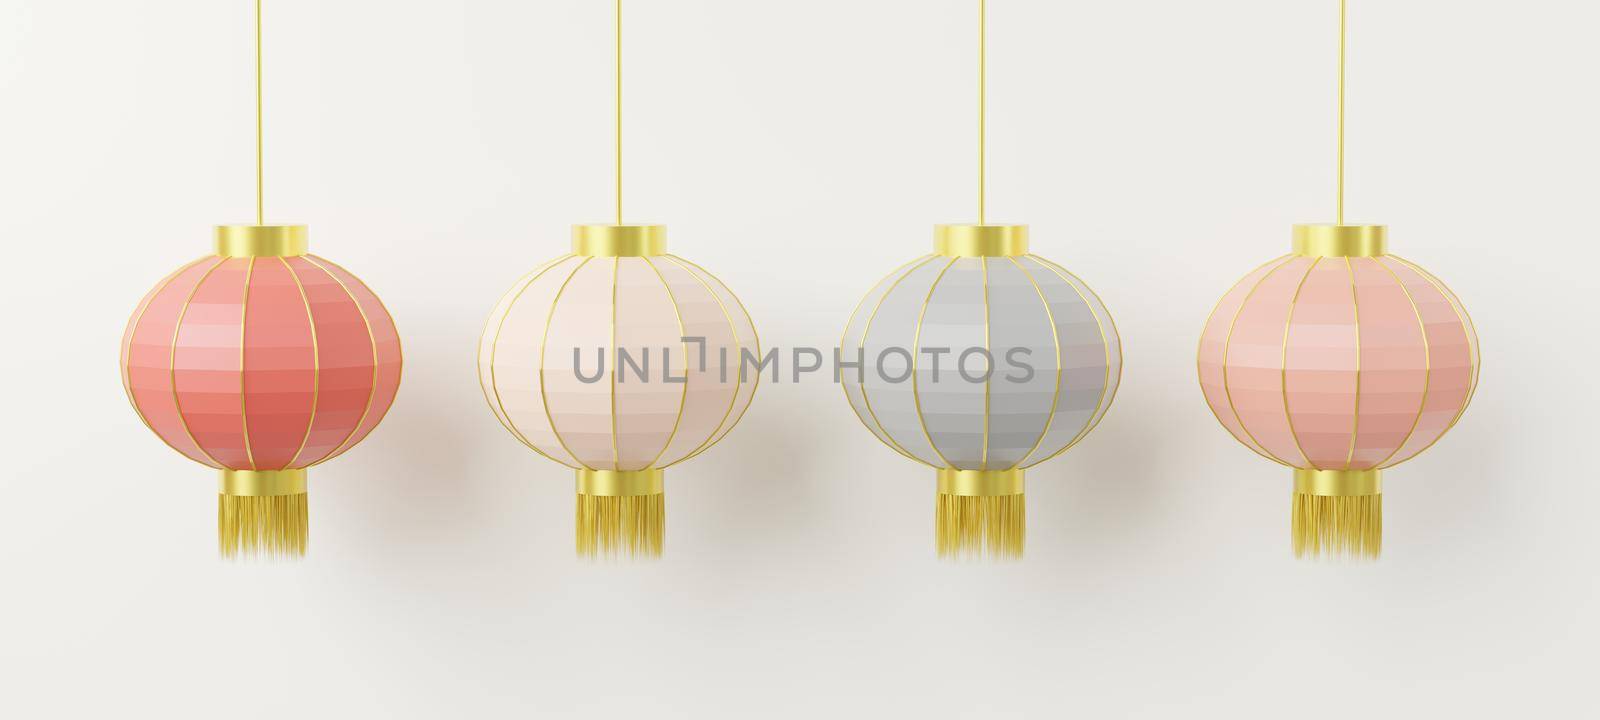 Chinese new year or Chinese lantern festival. Hanging lantern elements Traditional Asian decor on white background, CNY scene graphic design, 3D Rendering Illustration